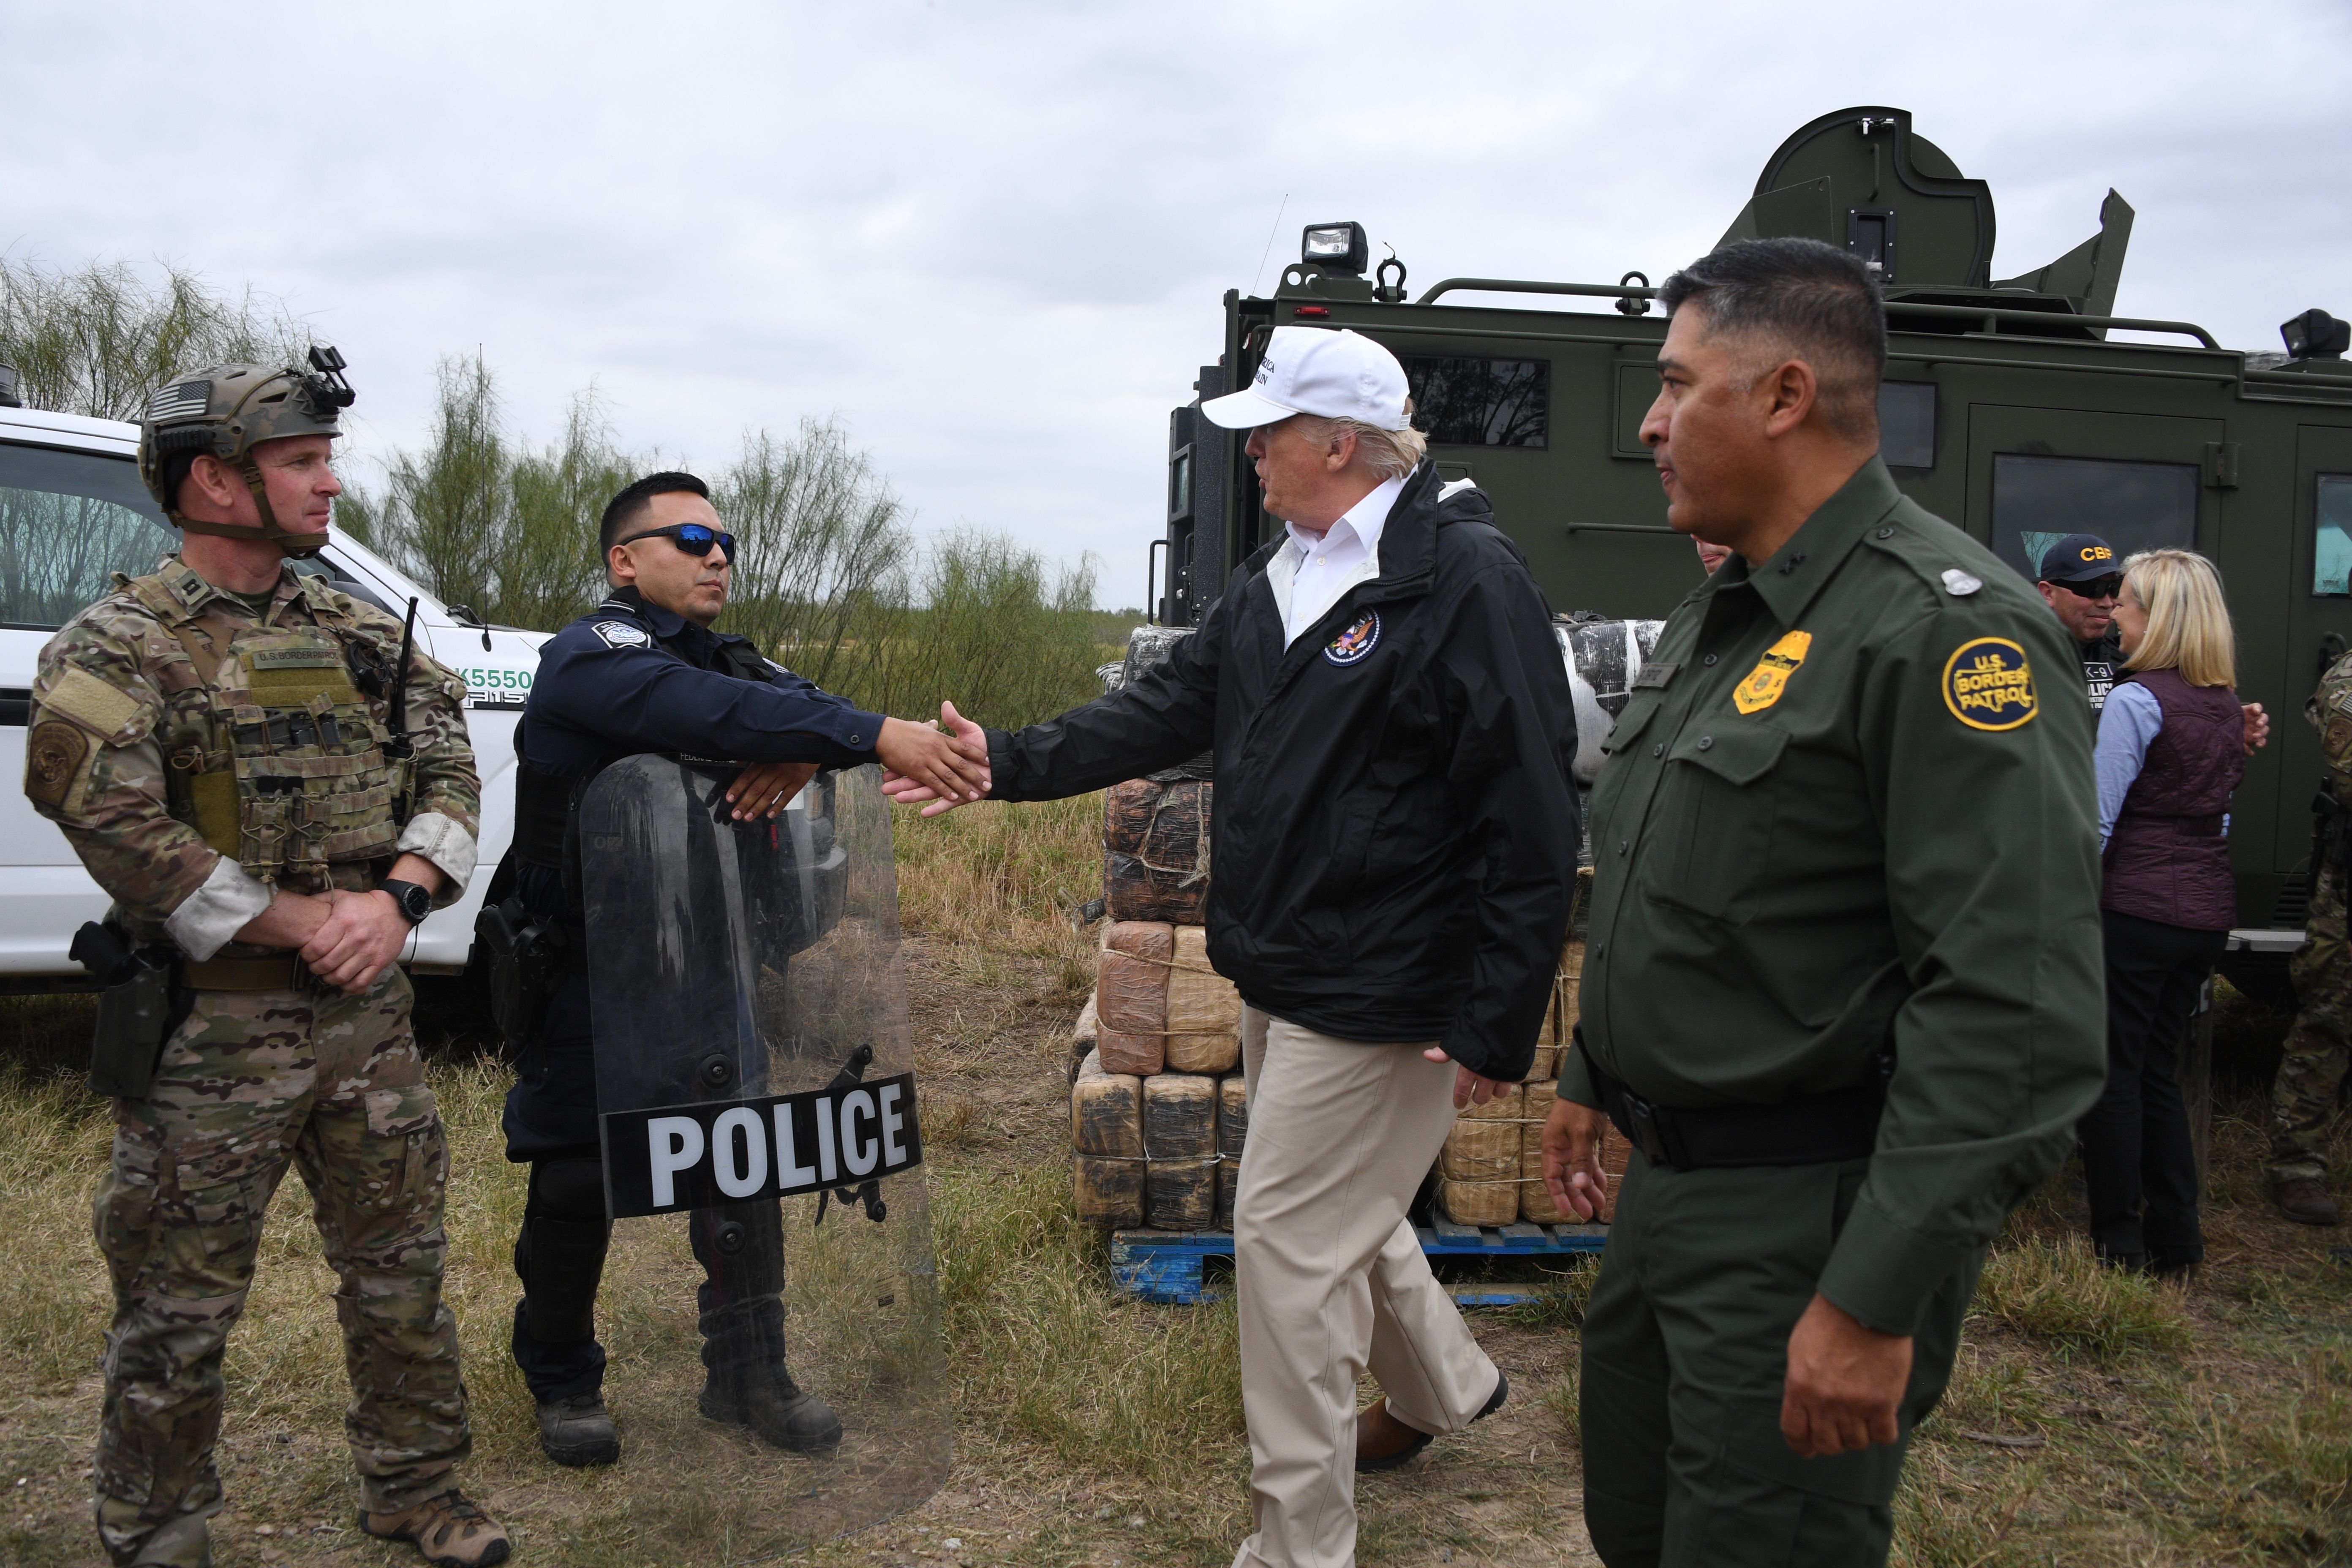 US President Donald Trump(C) greets a policeman with Border Patrol agents,and military after his visit to US Border Patrol McAllen Station in McAllen, Texas, on January 10, 2019. - Trump traveled to the US-Mexico border as part of his all-out offensive to build a wall, a day after he stormed out of negotiations when Democratic opponents refused to agree to fund the project in exchange for an end to a painful government shutdown. (Photo by Jim WATSON / AFP) (Photo credit should read JIM WATSON/AFP via Getty Images)